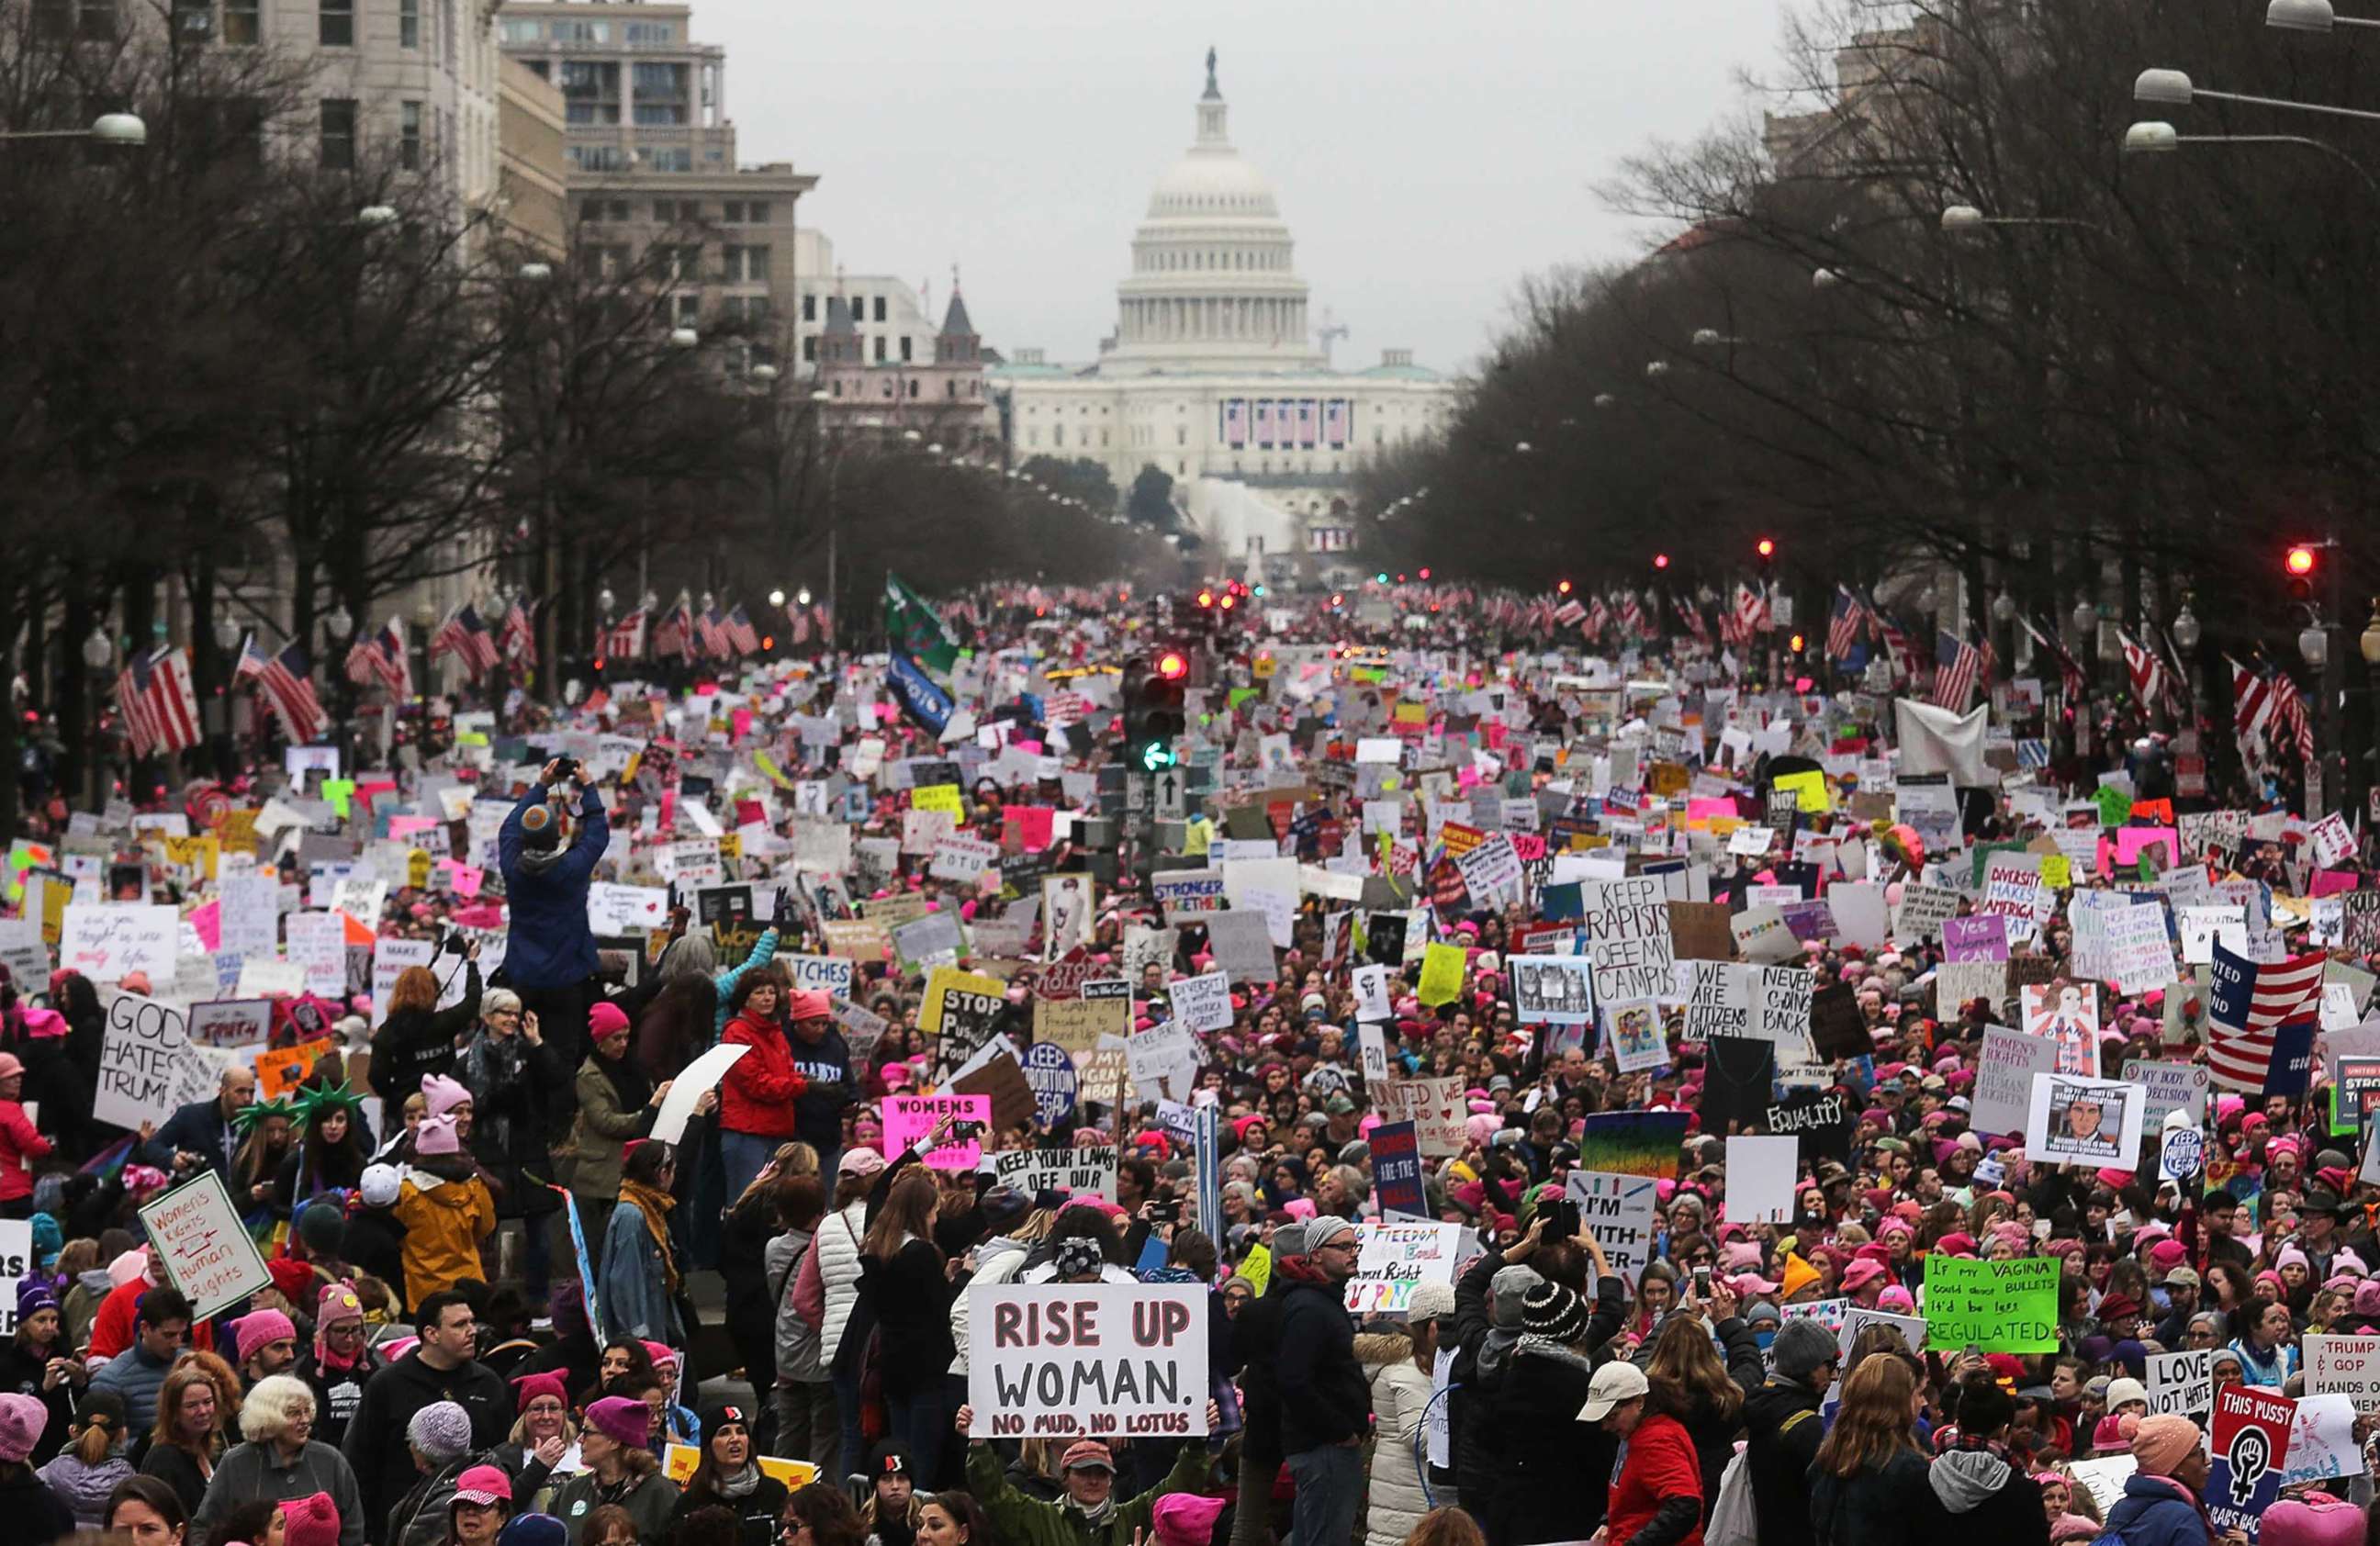 PHOTO: In this Jan. 21, 2017, file photo, protesters walk during the Women's March on Washington, with the U.S. Capitol in the background, in Washington, D.C.